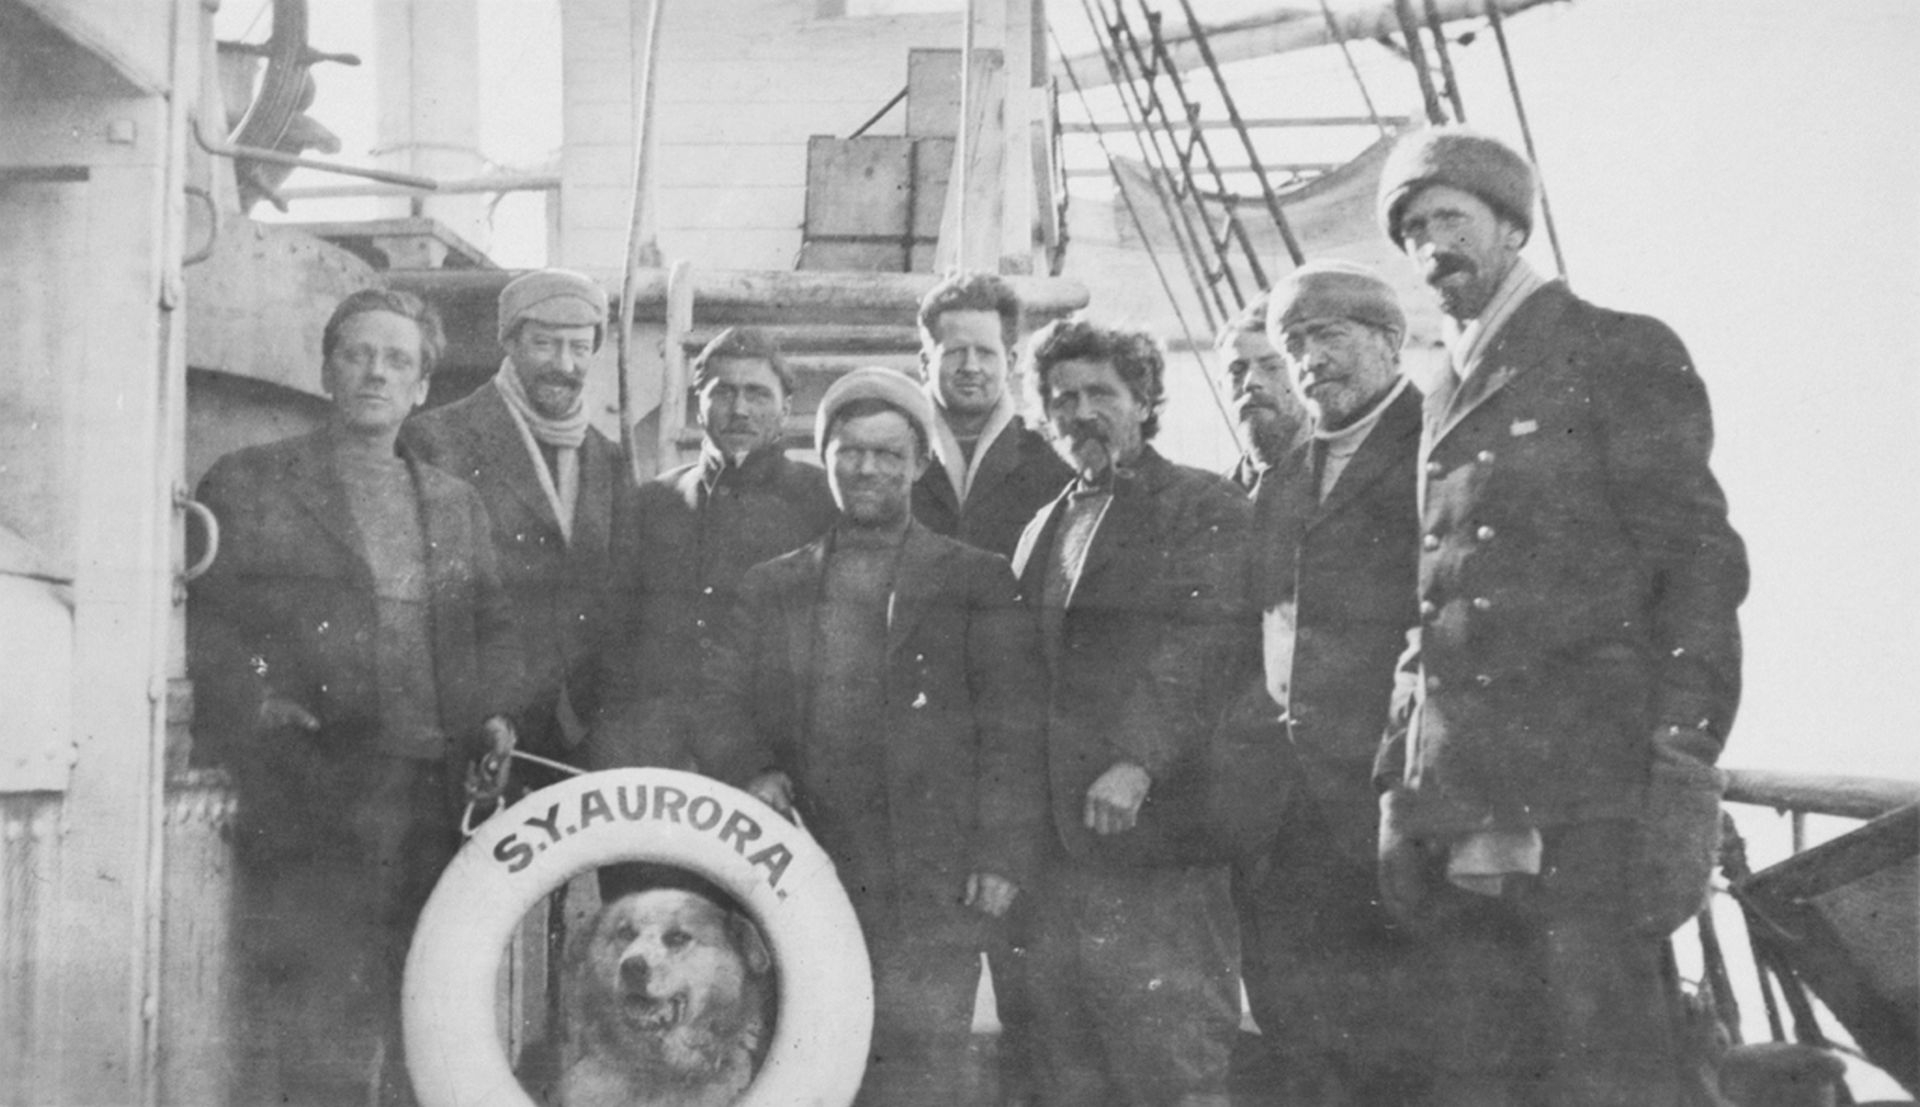 Survivors of the Ross Sea Party on board the Aurora, January 1917.